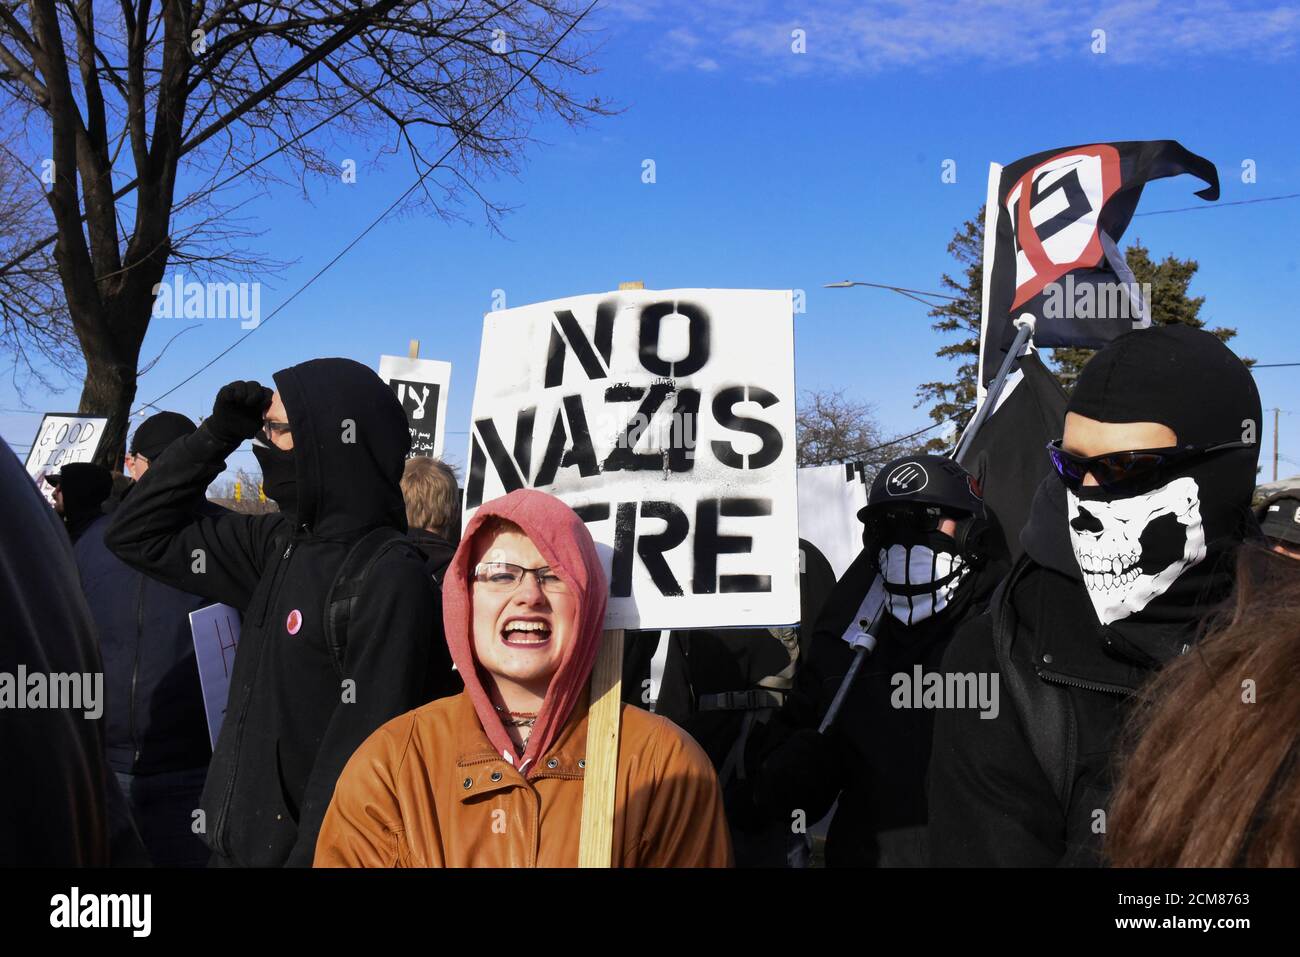 Members of the Great Lakes anti-fascist organization (Antifa) protest against the Alt-right outside a hotel in Warren, Michigan, U.S., March 4, 2018. REUTERS/Stephanie Keith Stock Photo